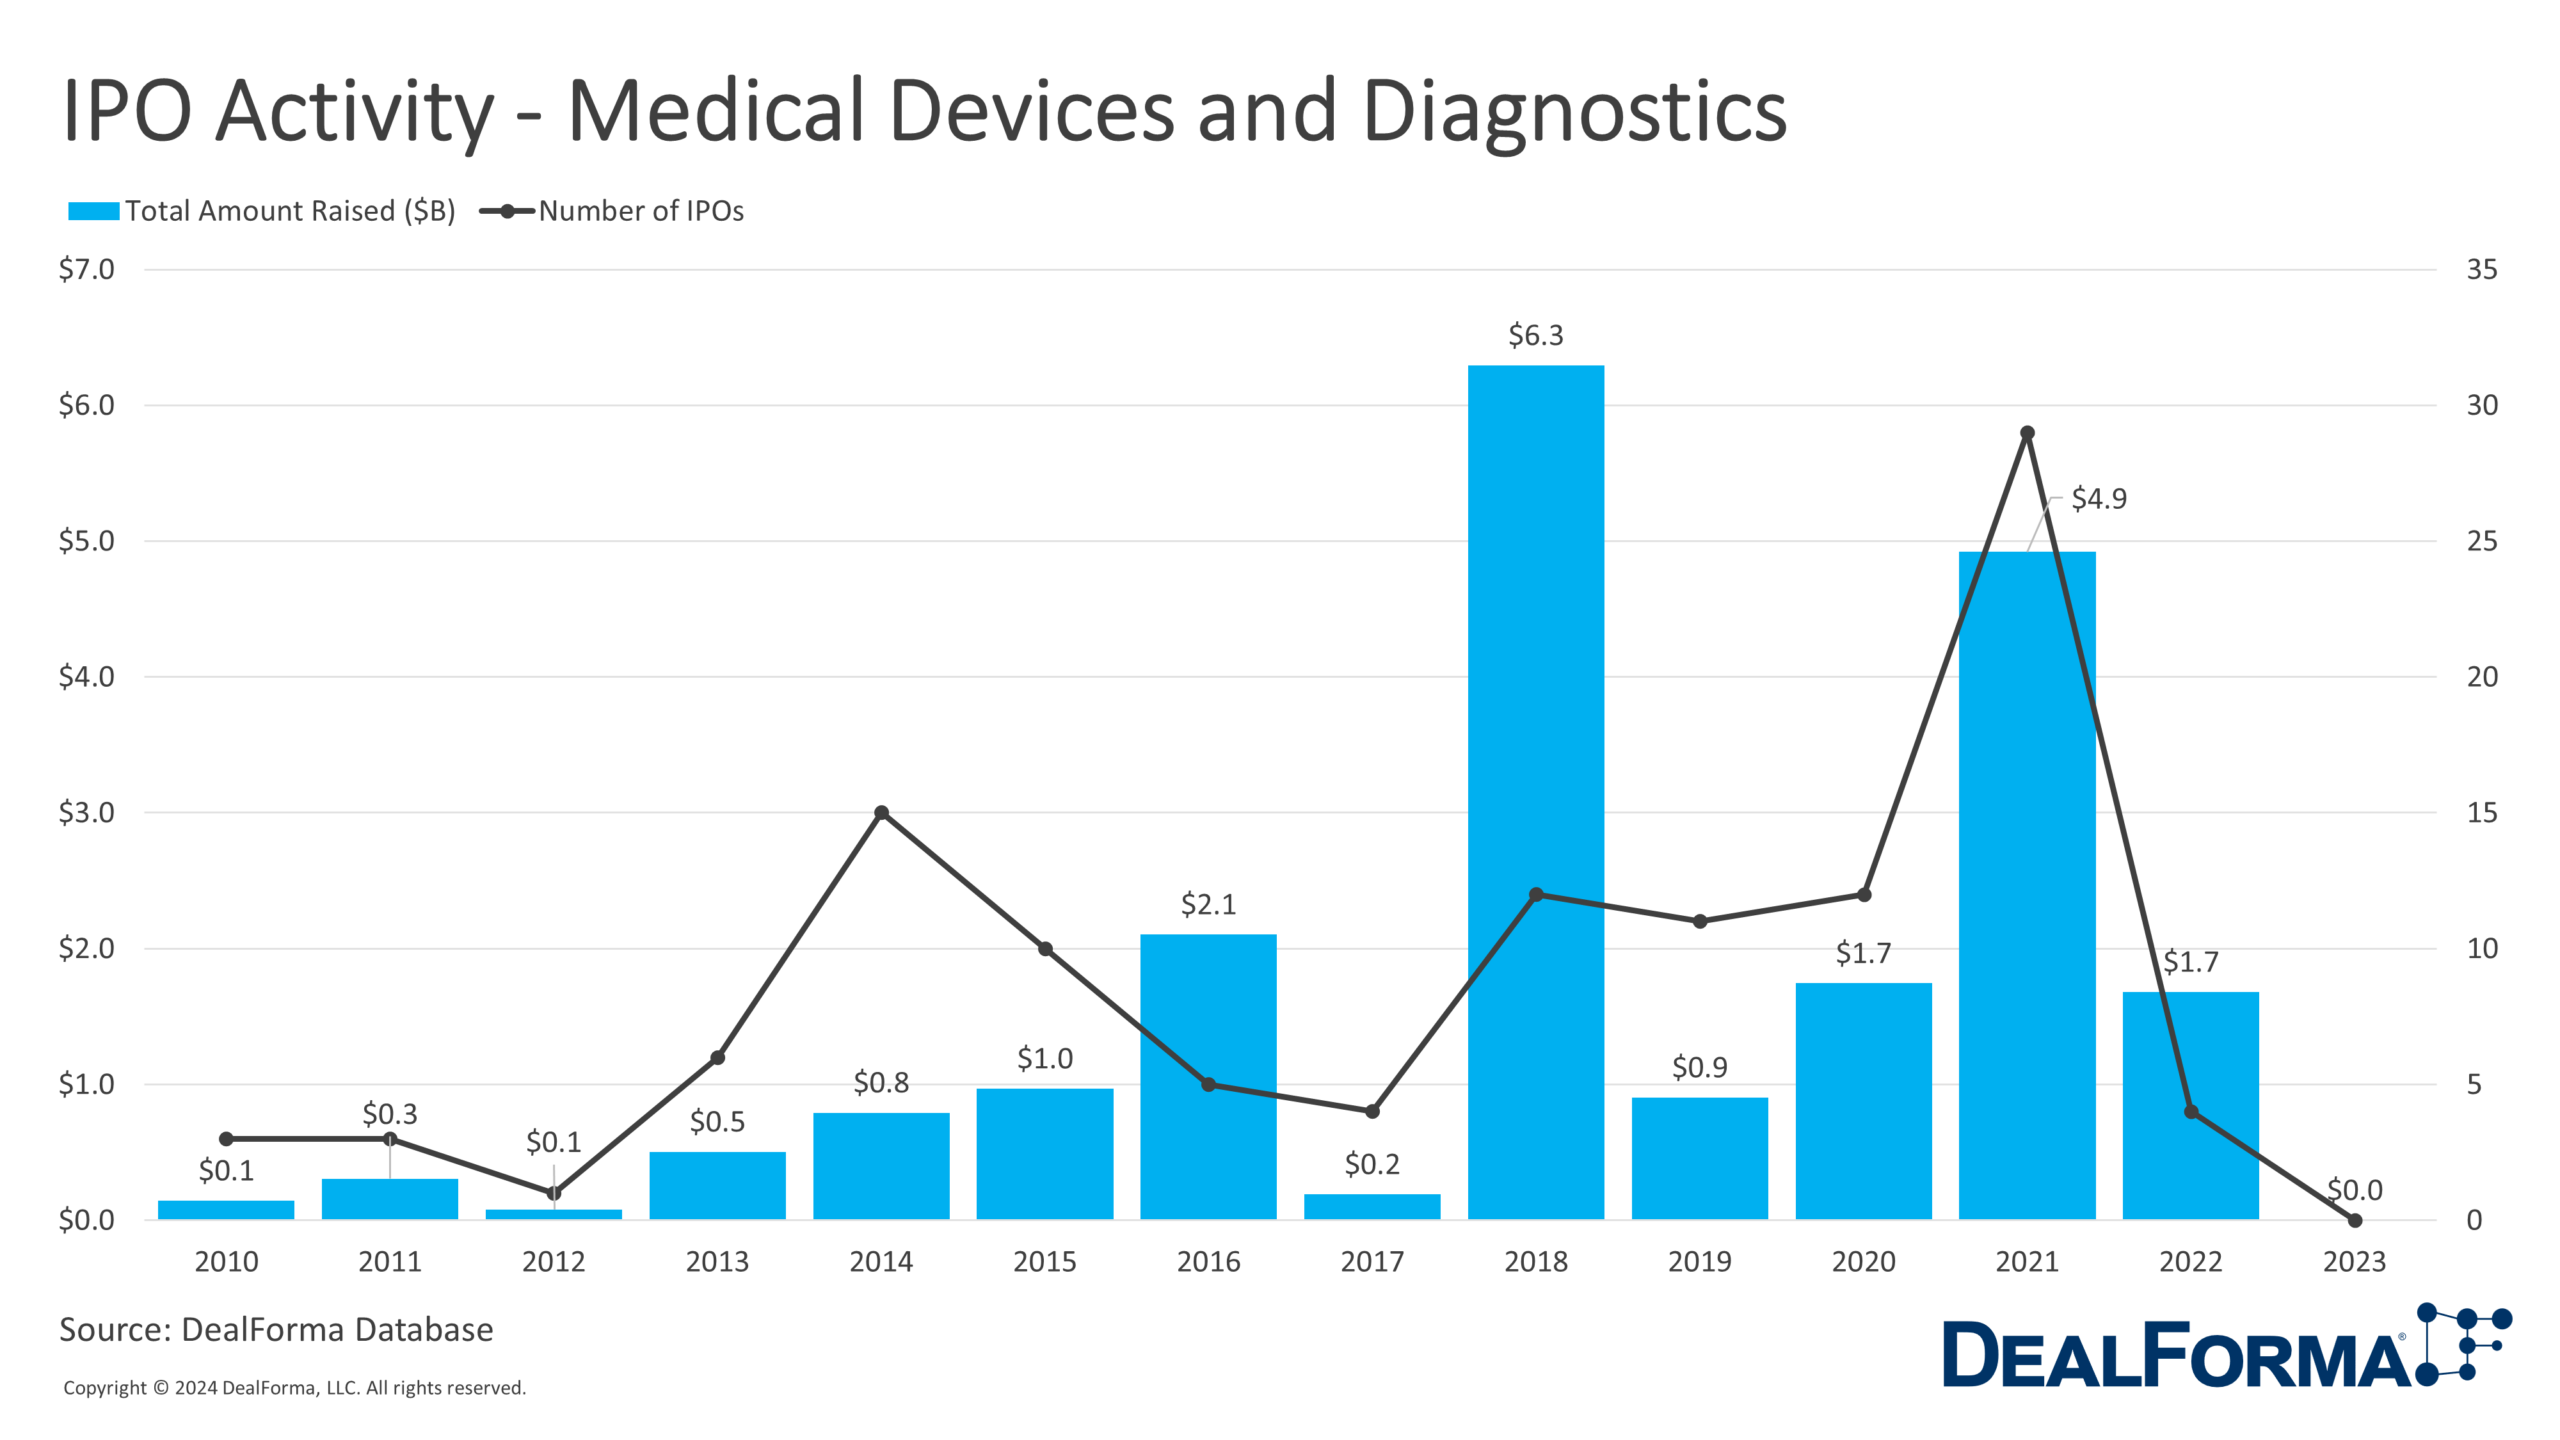 IPO Activity - Medical Devices and Diagnostics